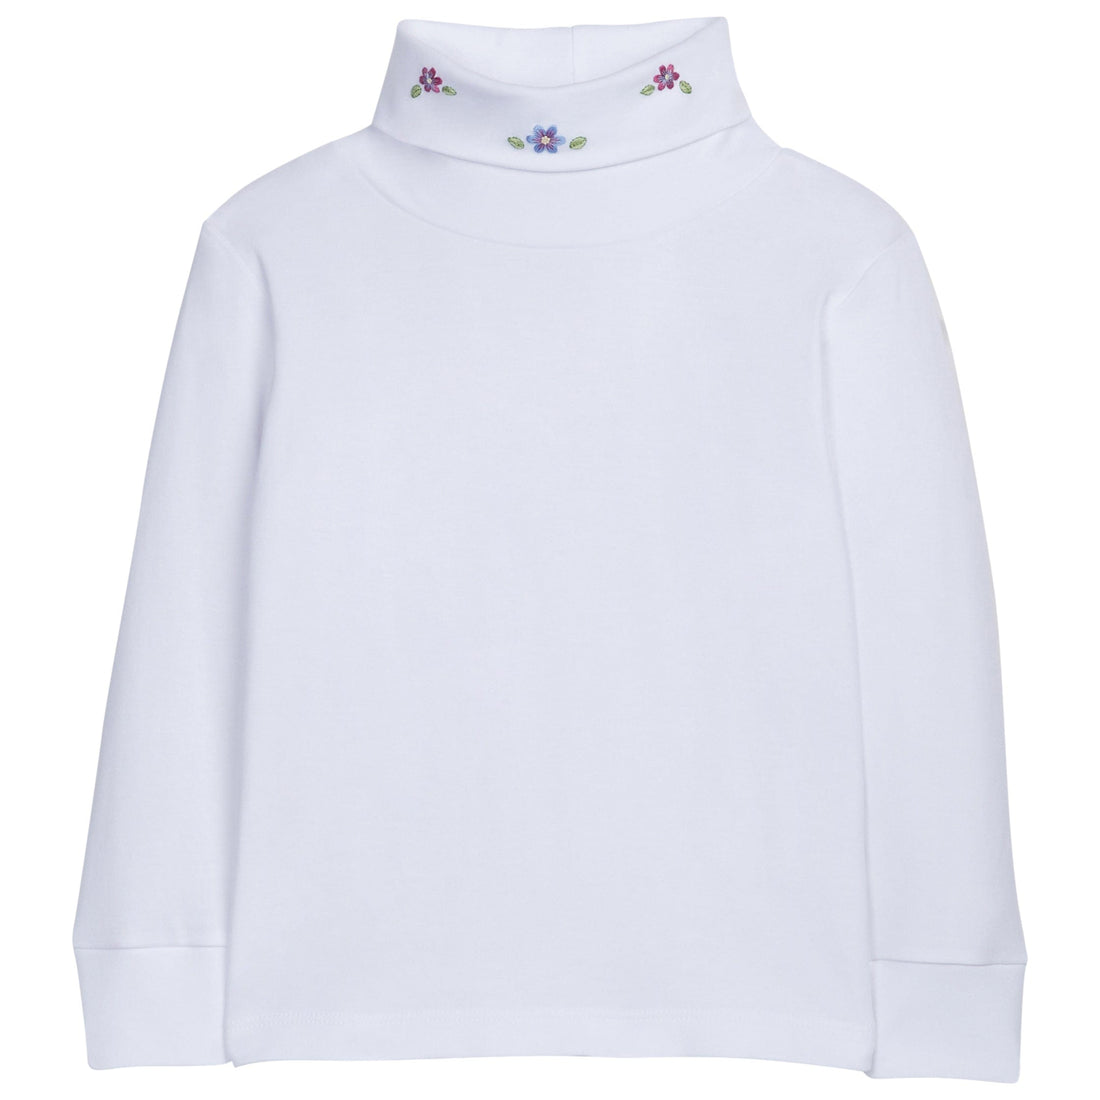 little english classic childrens clothing girls white turtleneck with embroidered flowers on neck